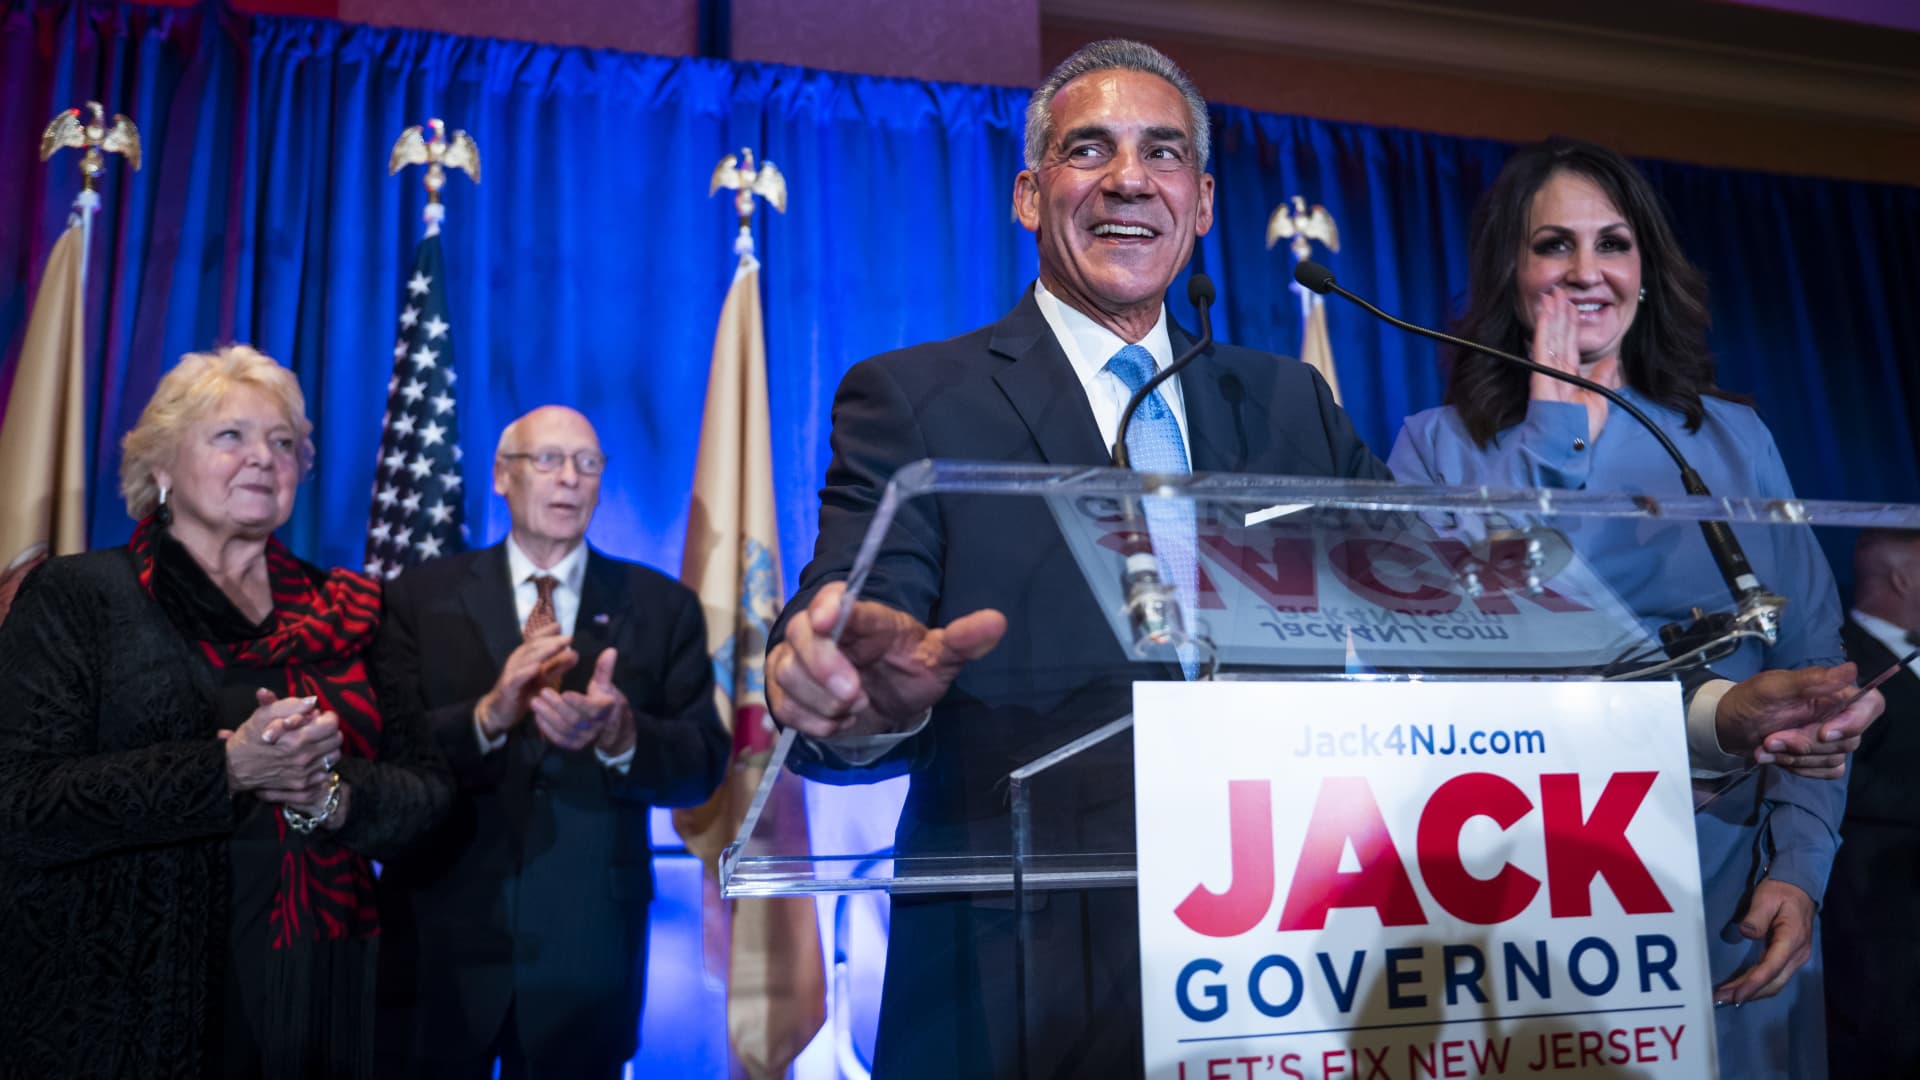 Jack Ciattarelli, Republican candidate for governor of New Jersey, speaks during an election night event in Bridgewater Township, New Jersey, U.S., on Wednesday, Nov. 3, 2021.